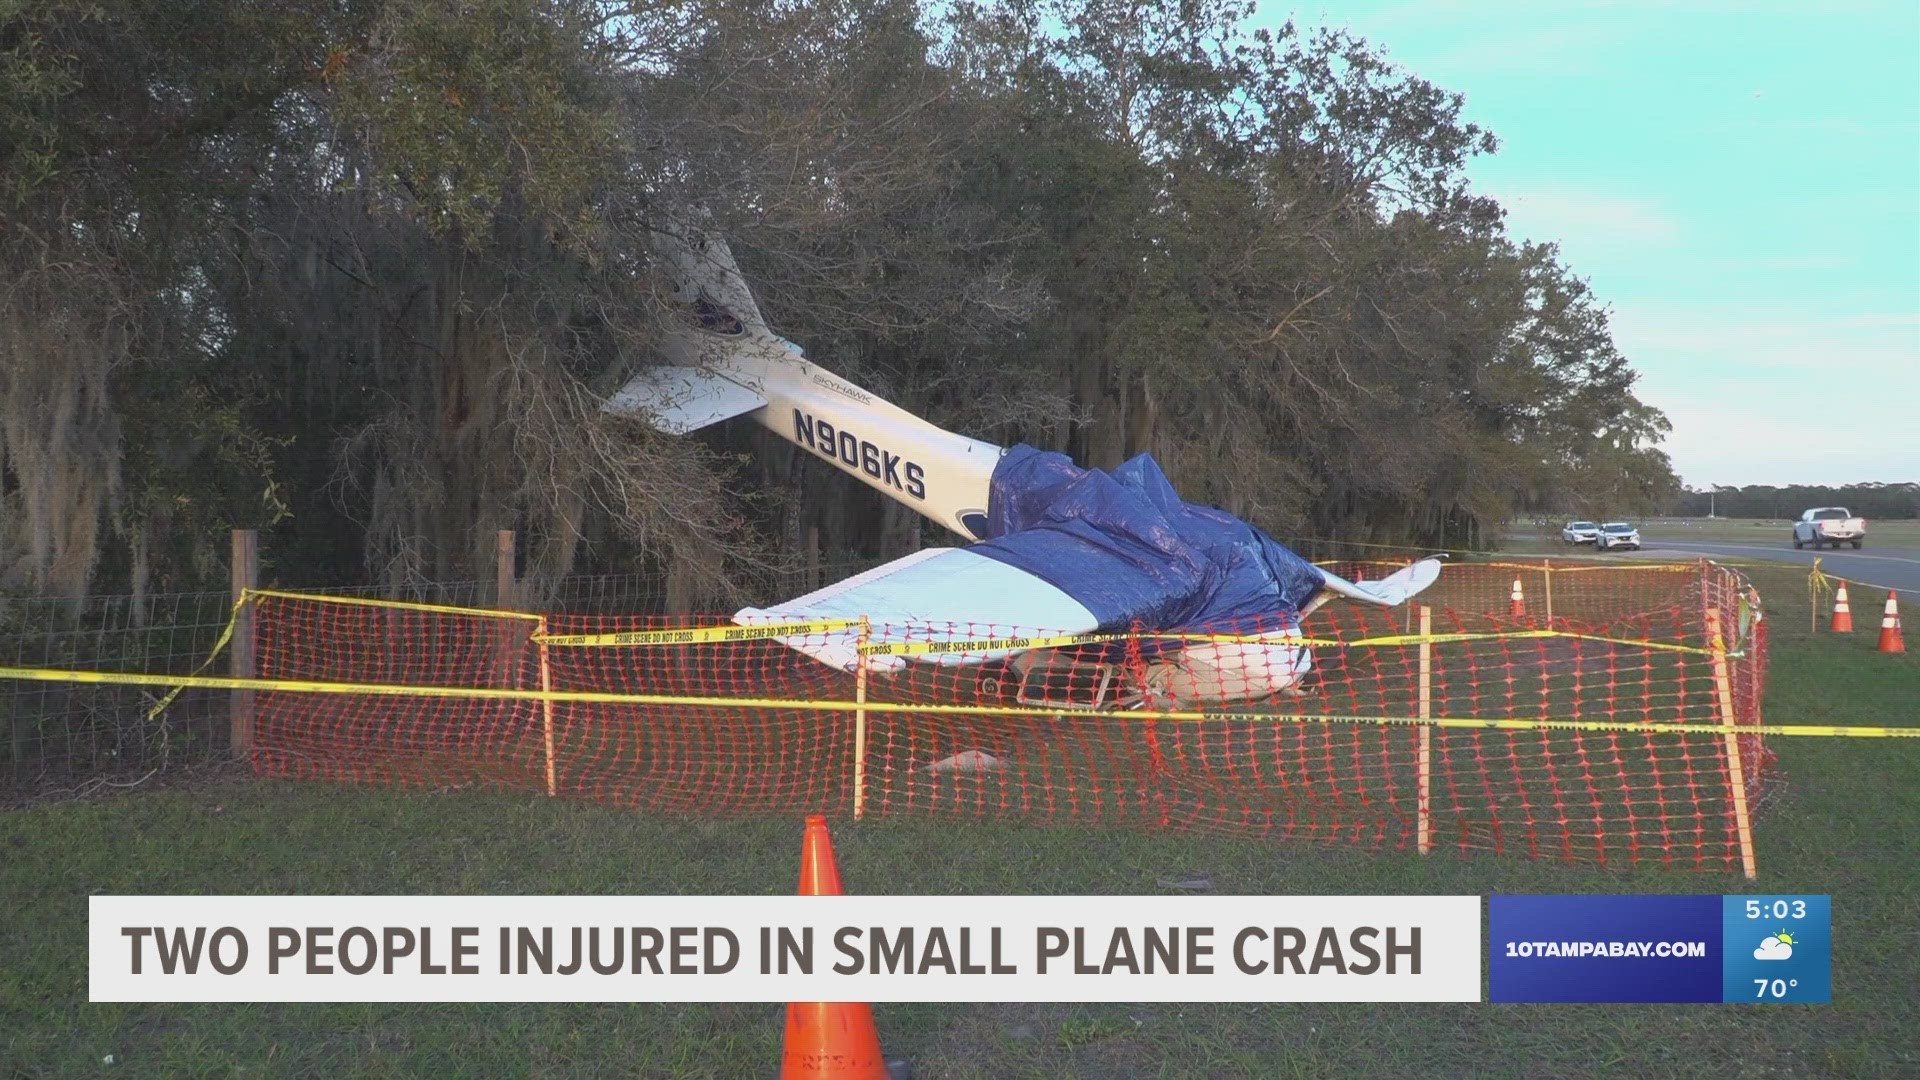 The FAA and NTSB have been requested to complete an investigation.